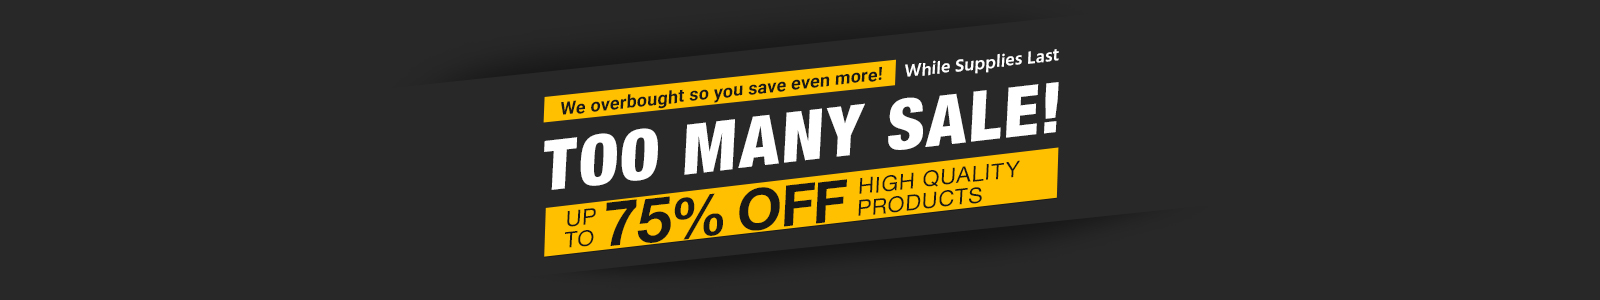 Blowout Sale!
Enjoy Big Discounts on high quality products
While Supplies Last
Shop Now